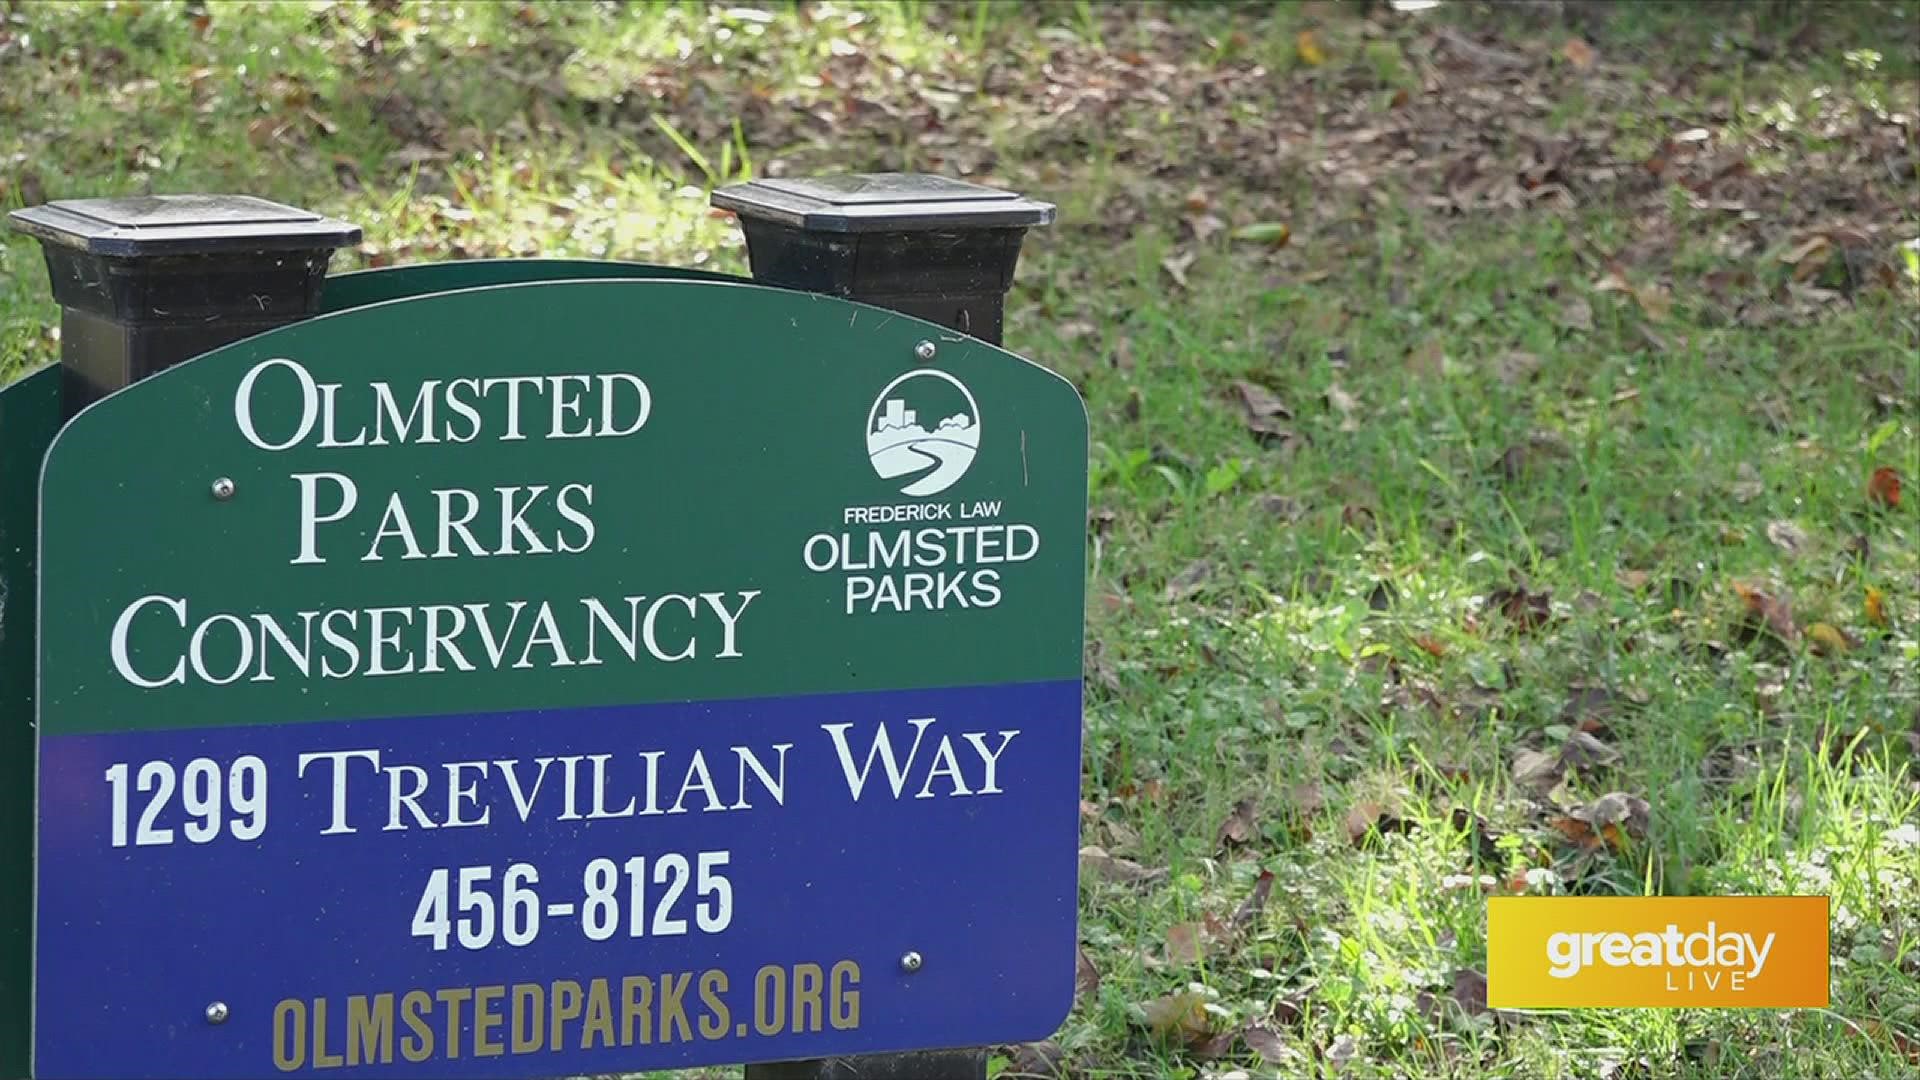 To learn more, visit OlmstedParks.org.